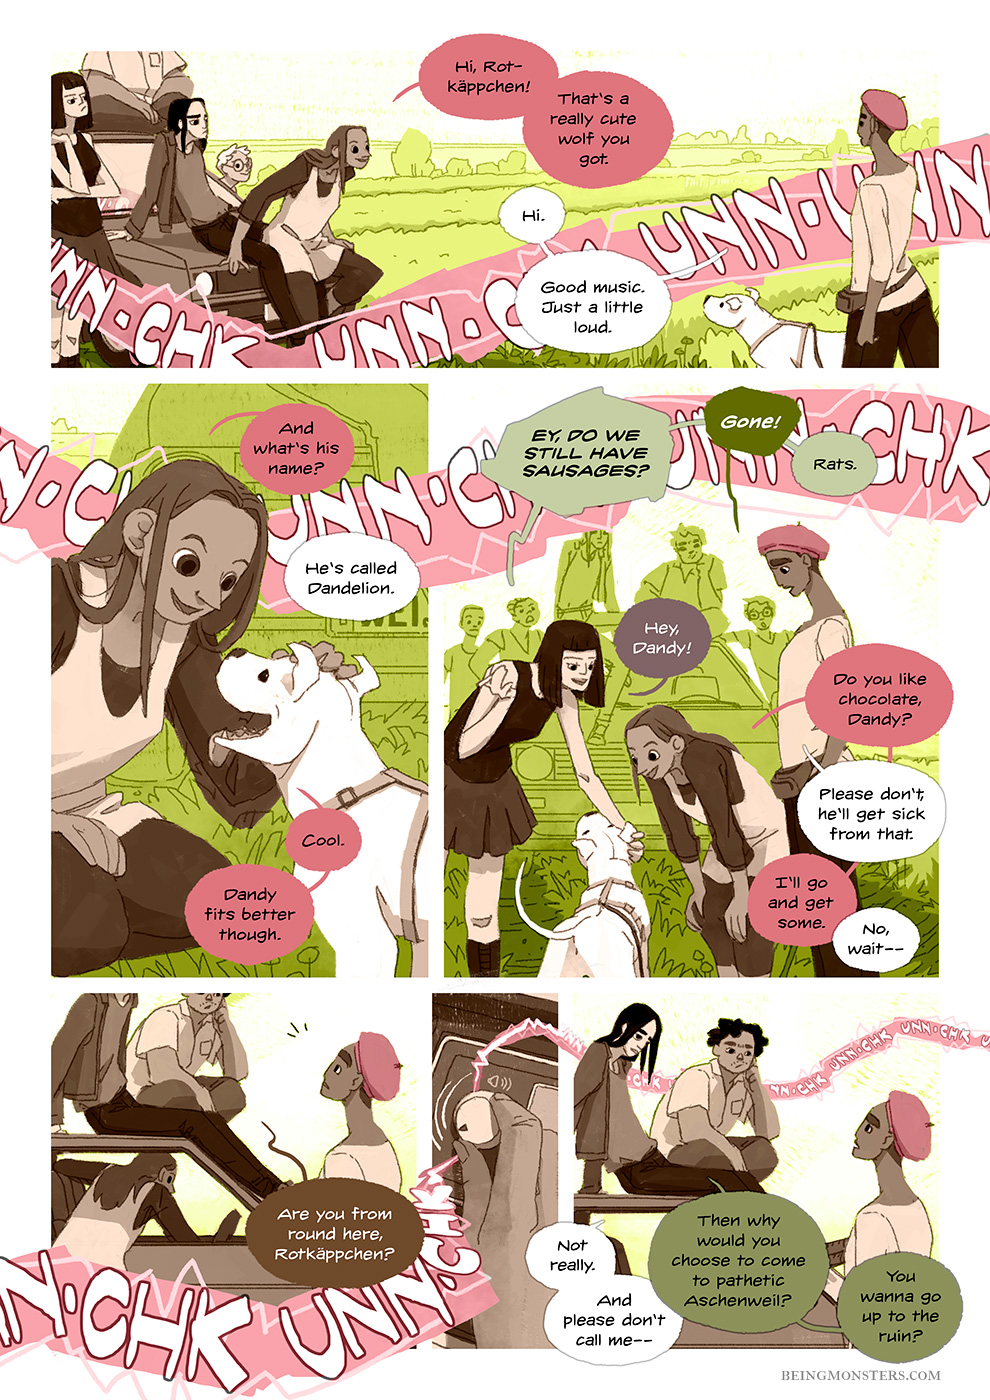 Being Monsters comic Book 1 Chapter 2 page 10 Julia Beutling